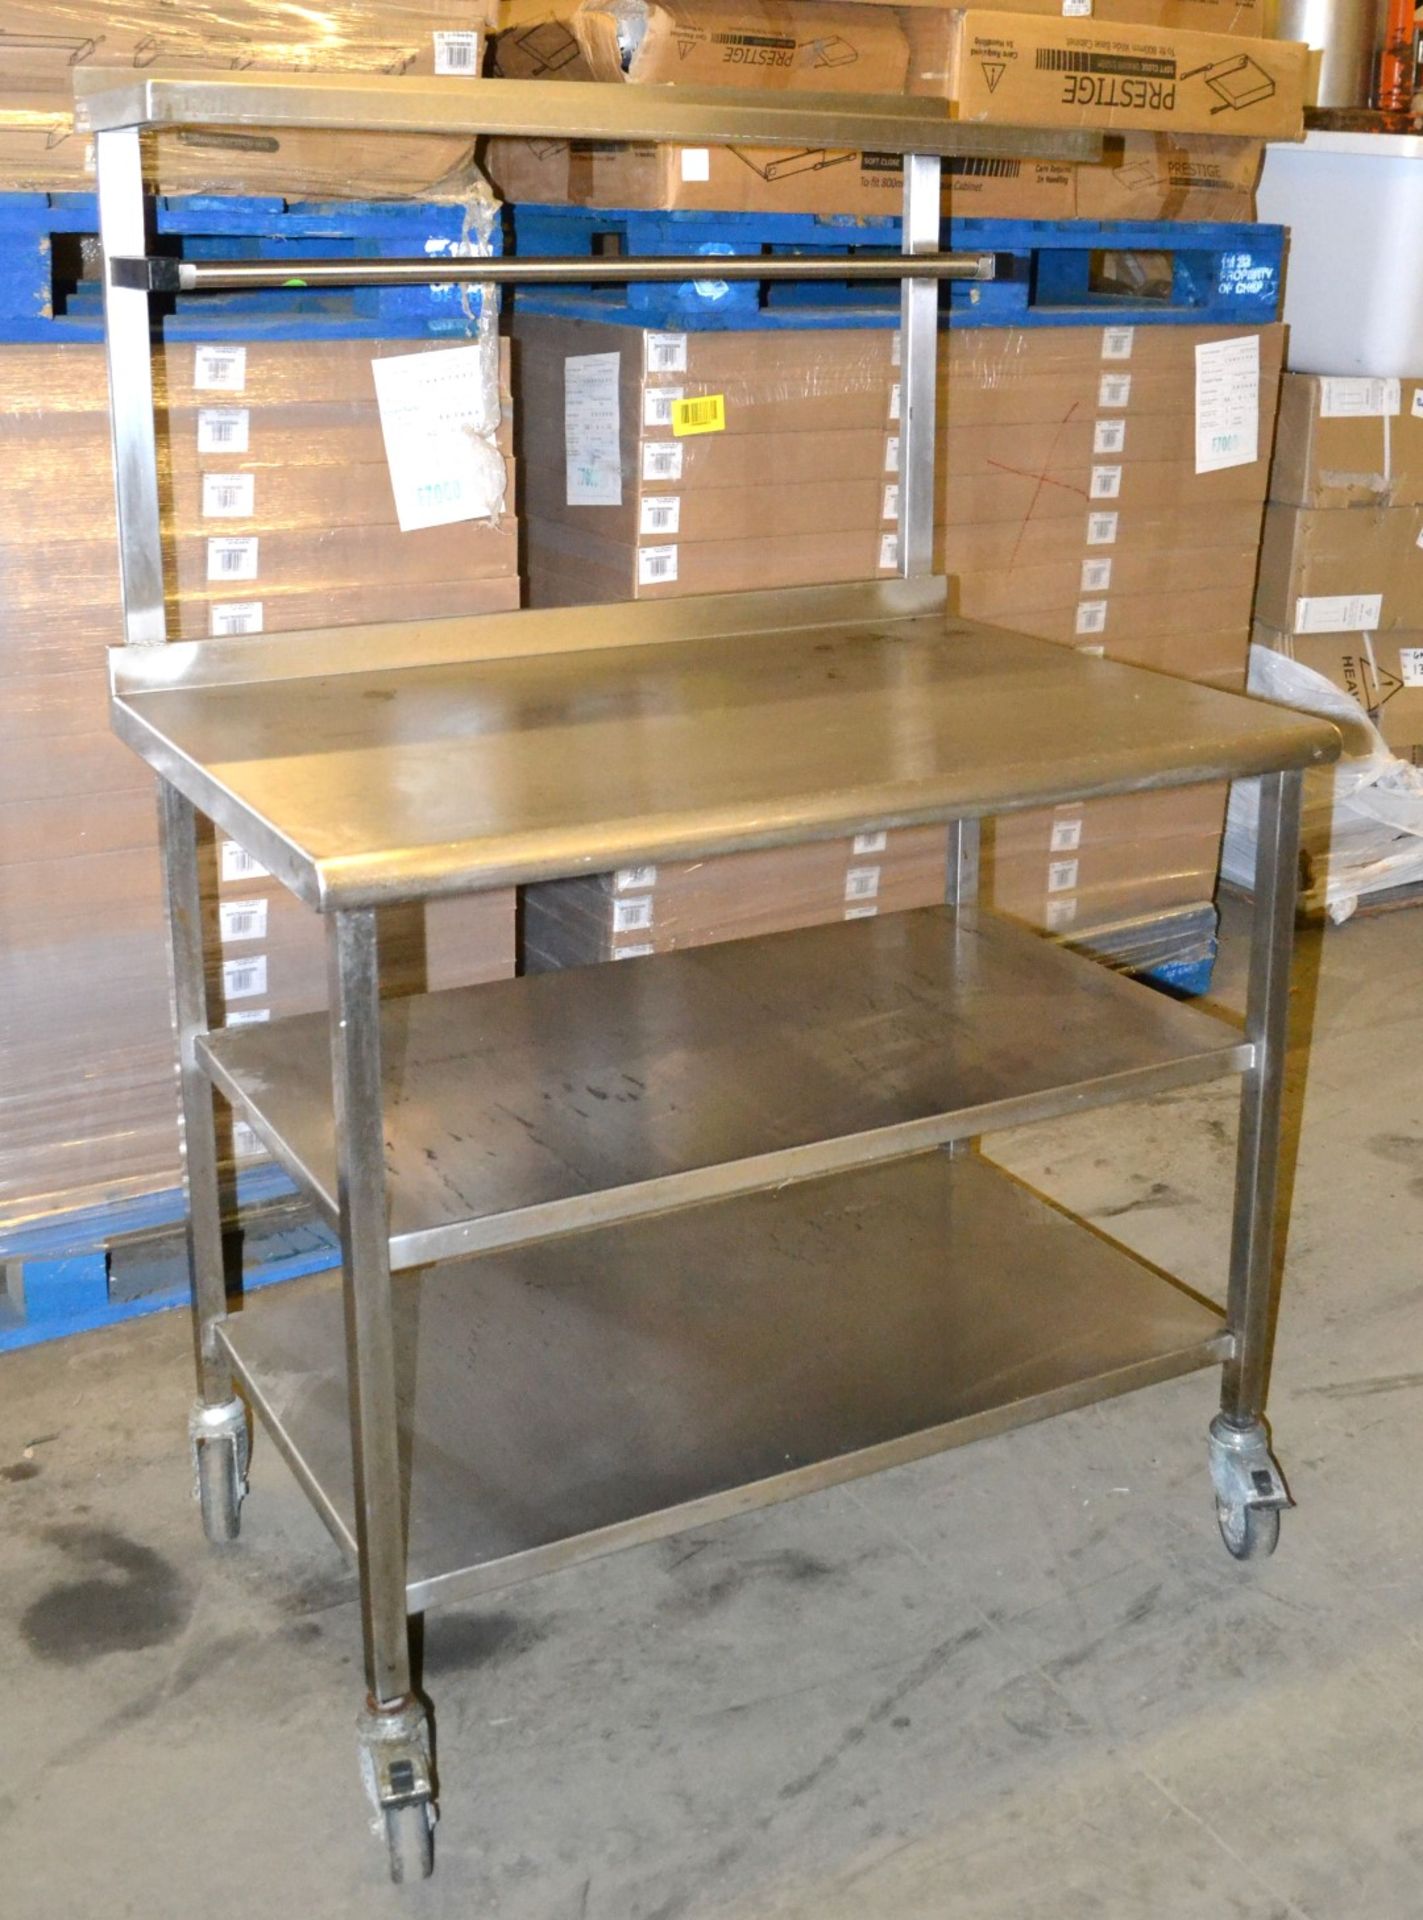 1 x Wheeled Stainless Steel Prep Table - Dimensions: 100 x 69.5 x 148cm - Ref: MC120 - CL282 - Locat